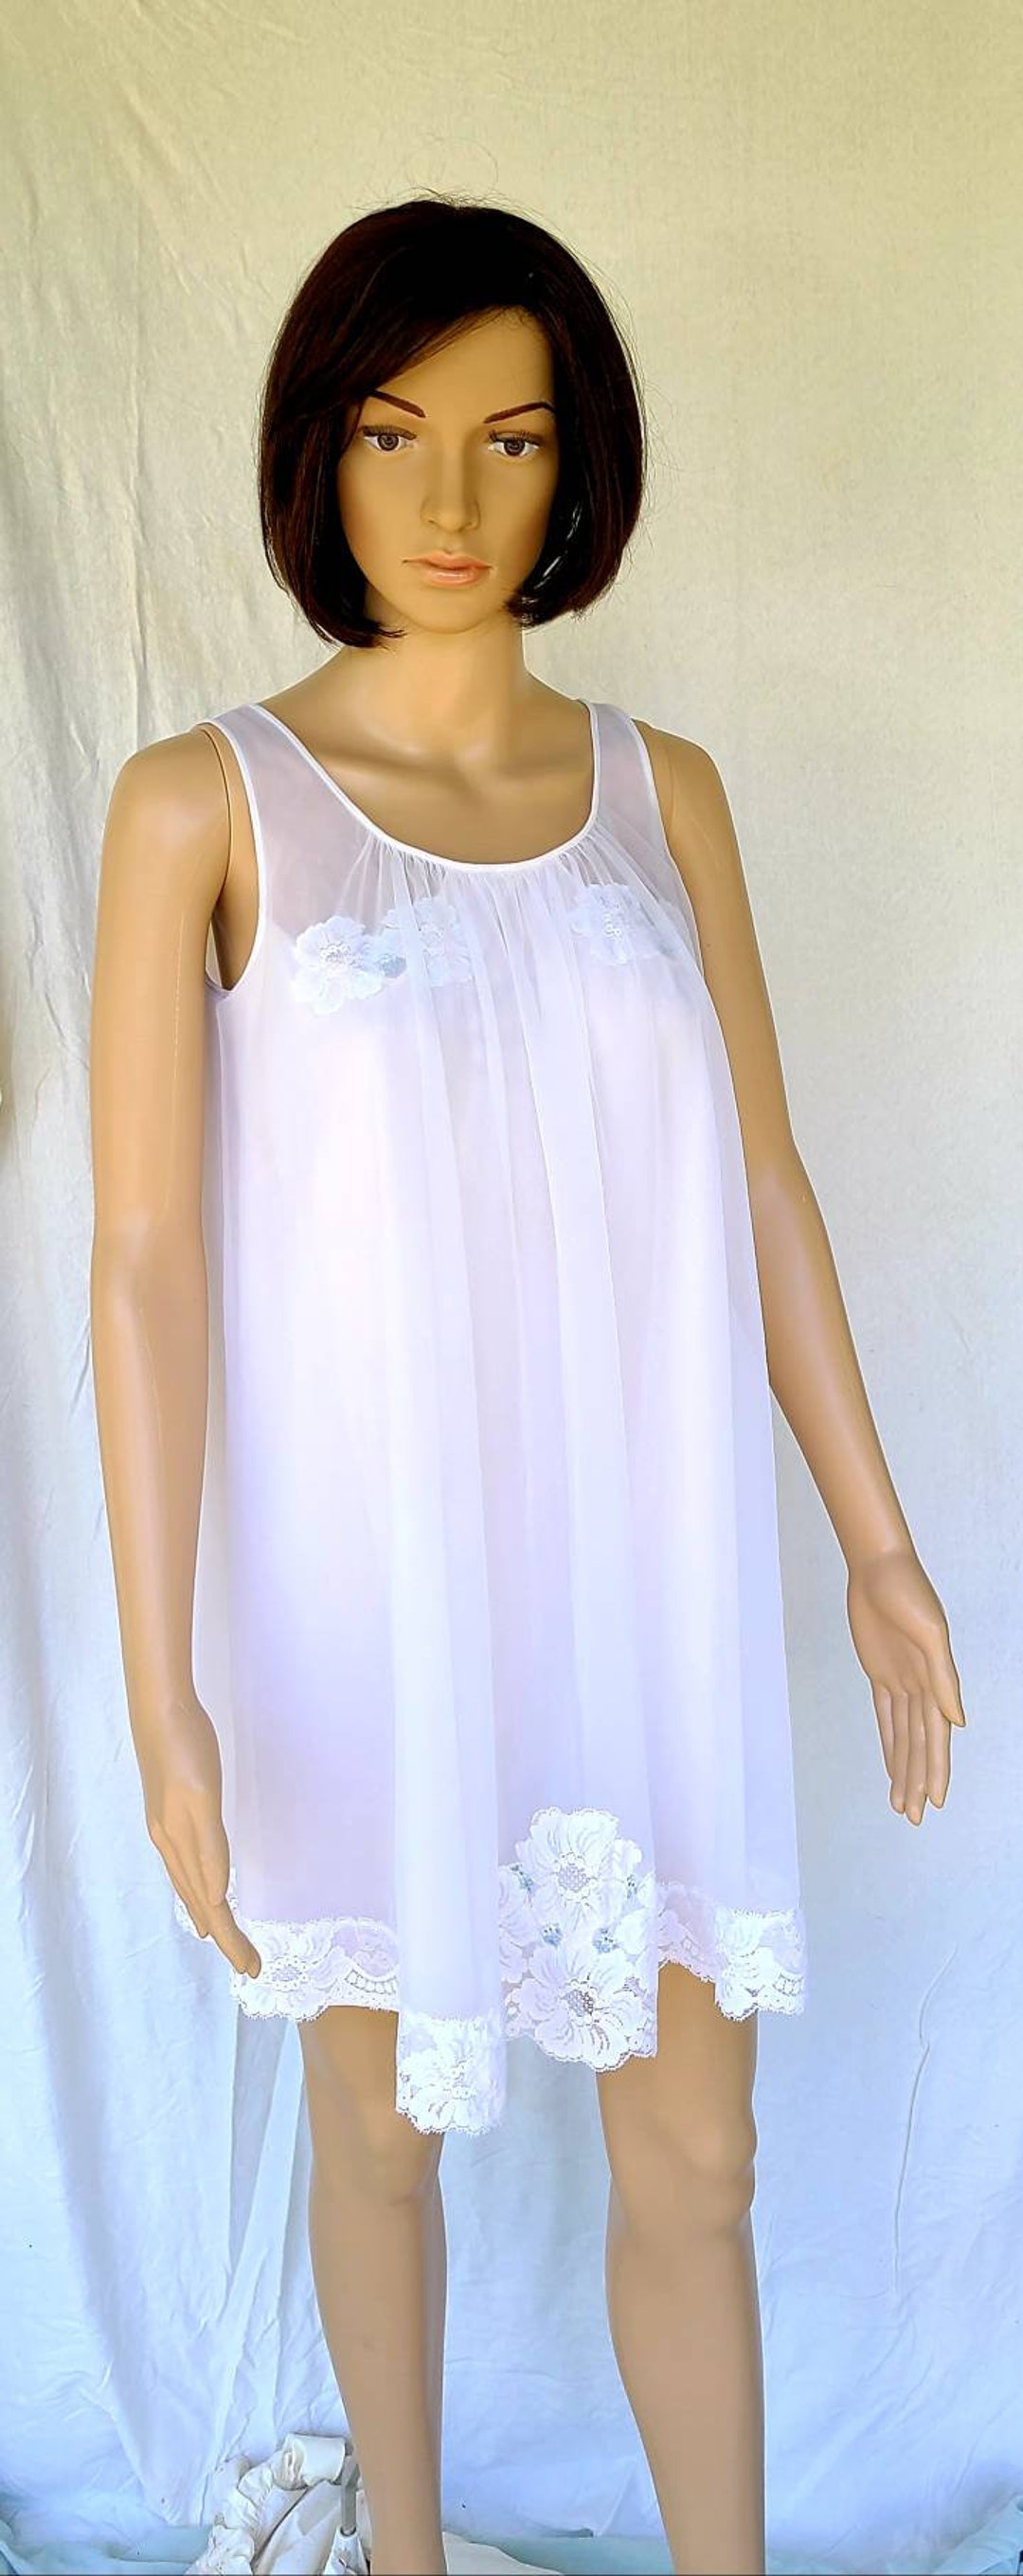 Shadowline Nylon Baby Doll Lingerie Nightgown Floral Lace Free - Etsy